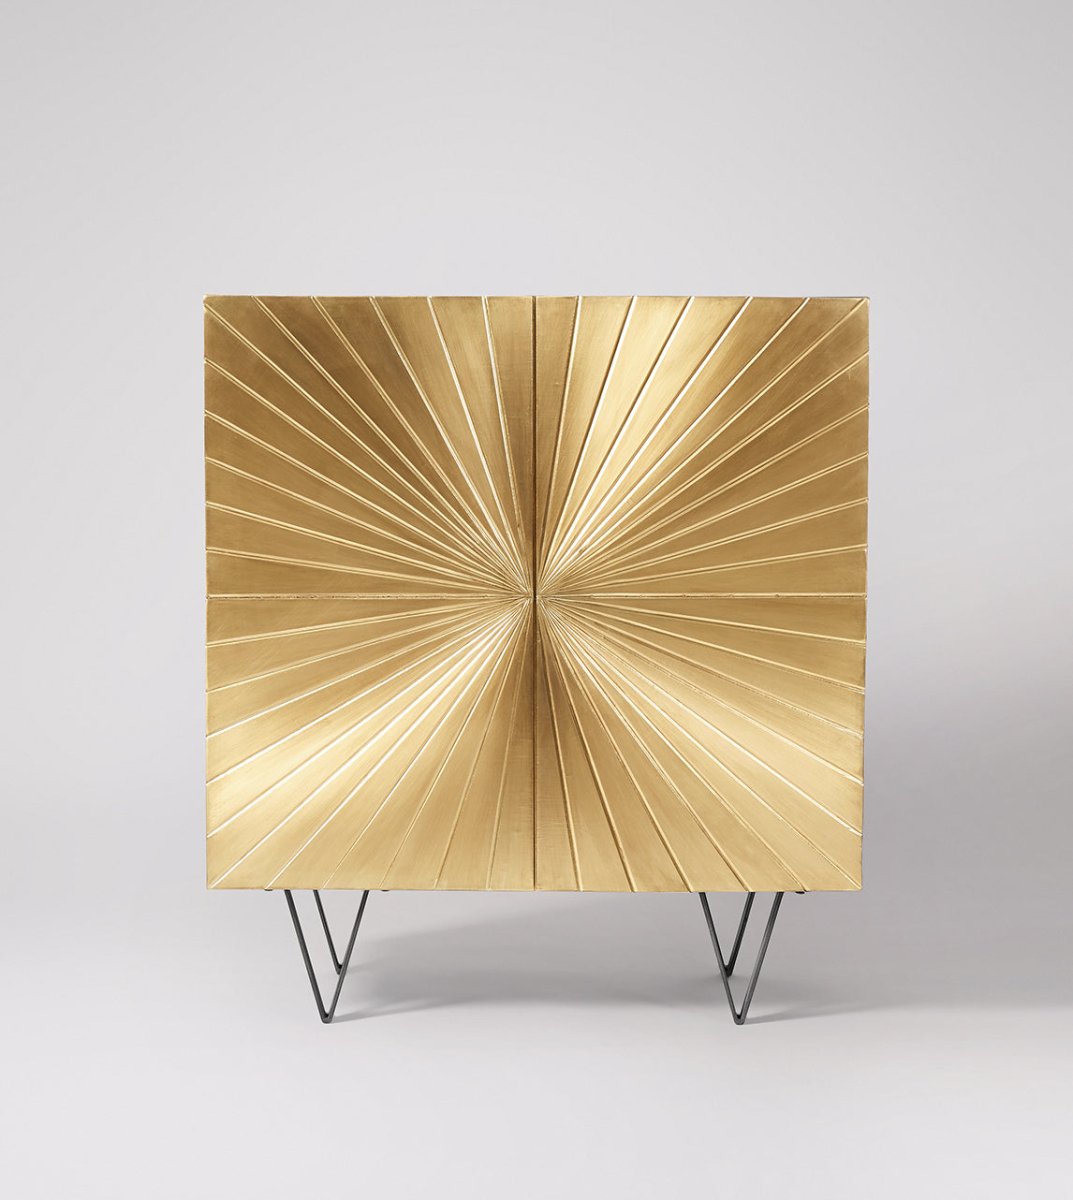 Hand Embossed Brass Cabinet | Wooden Golden Metal Cabinetry Furniture Cabinet - Bone Inlay Furnitures